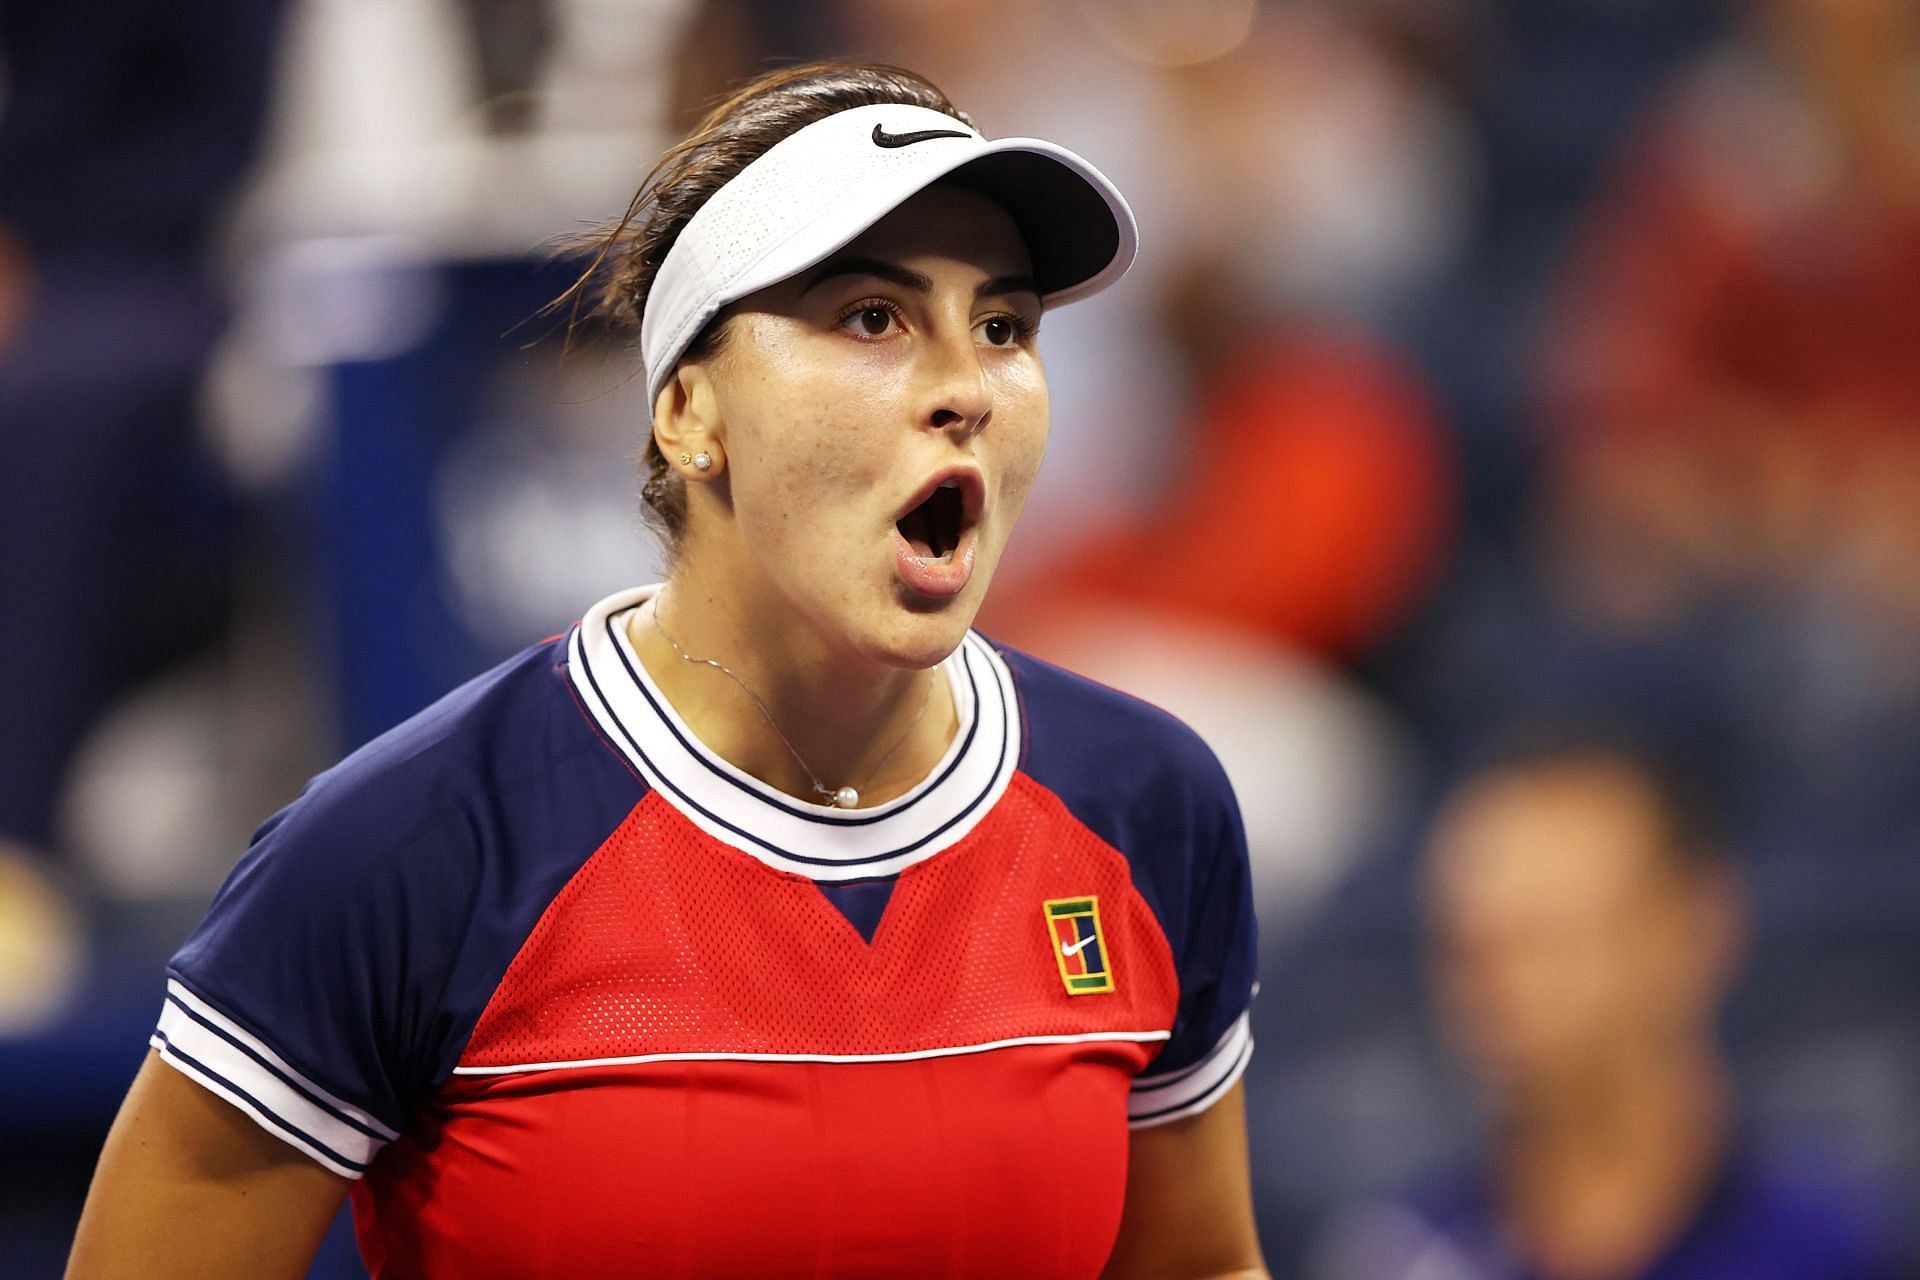 Bianca Andreescu will take on Danielle Collins in the second round of the Madrid Open